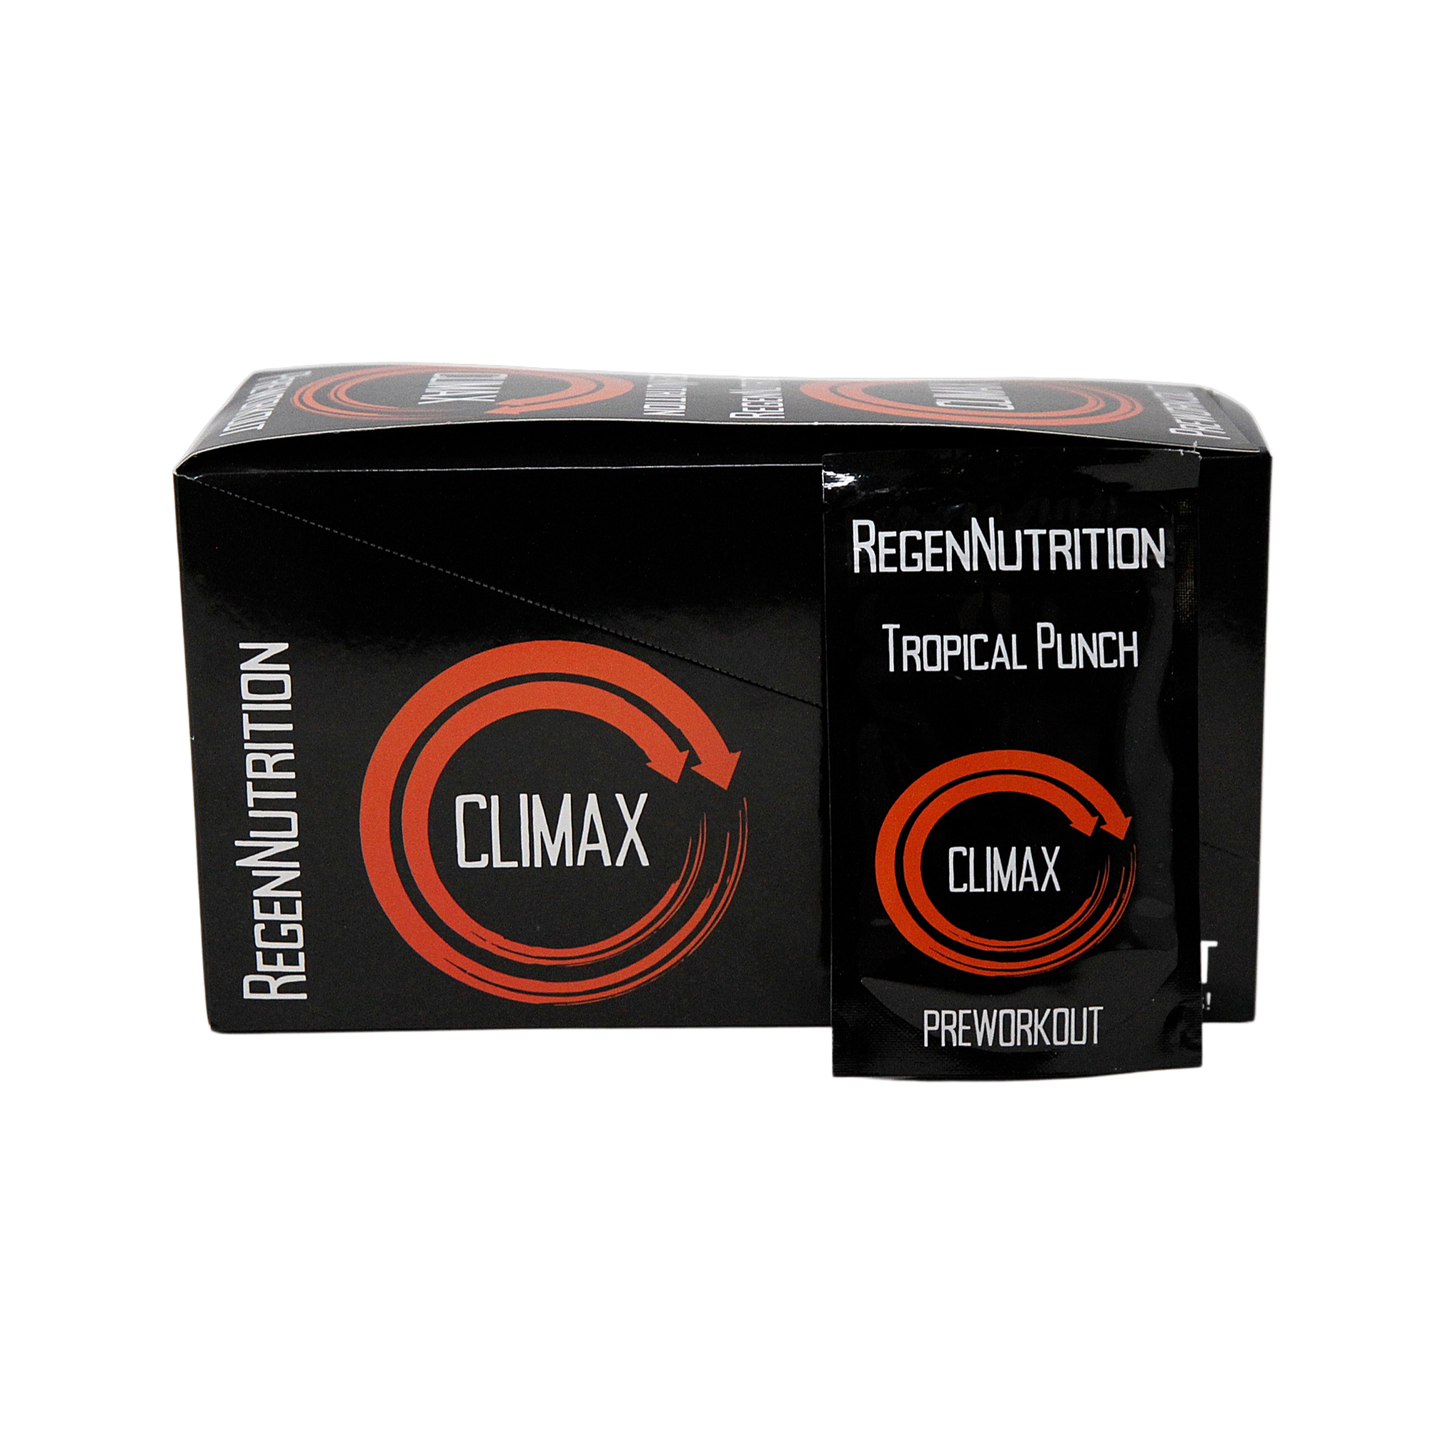 Tropical Punch CLIMAX Preworkout Packets